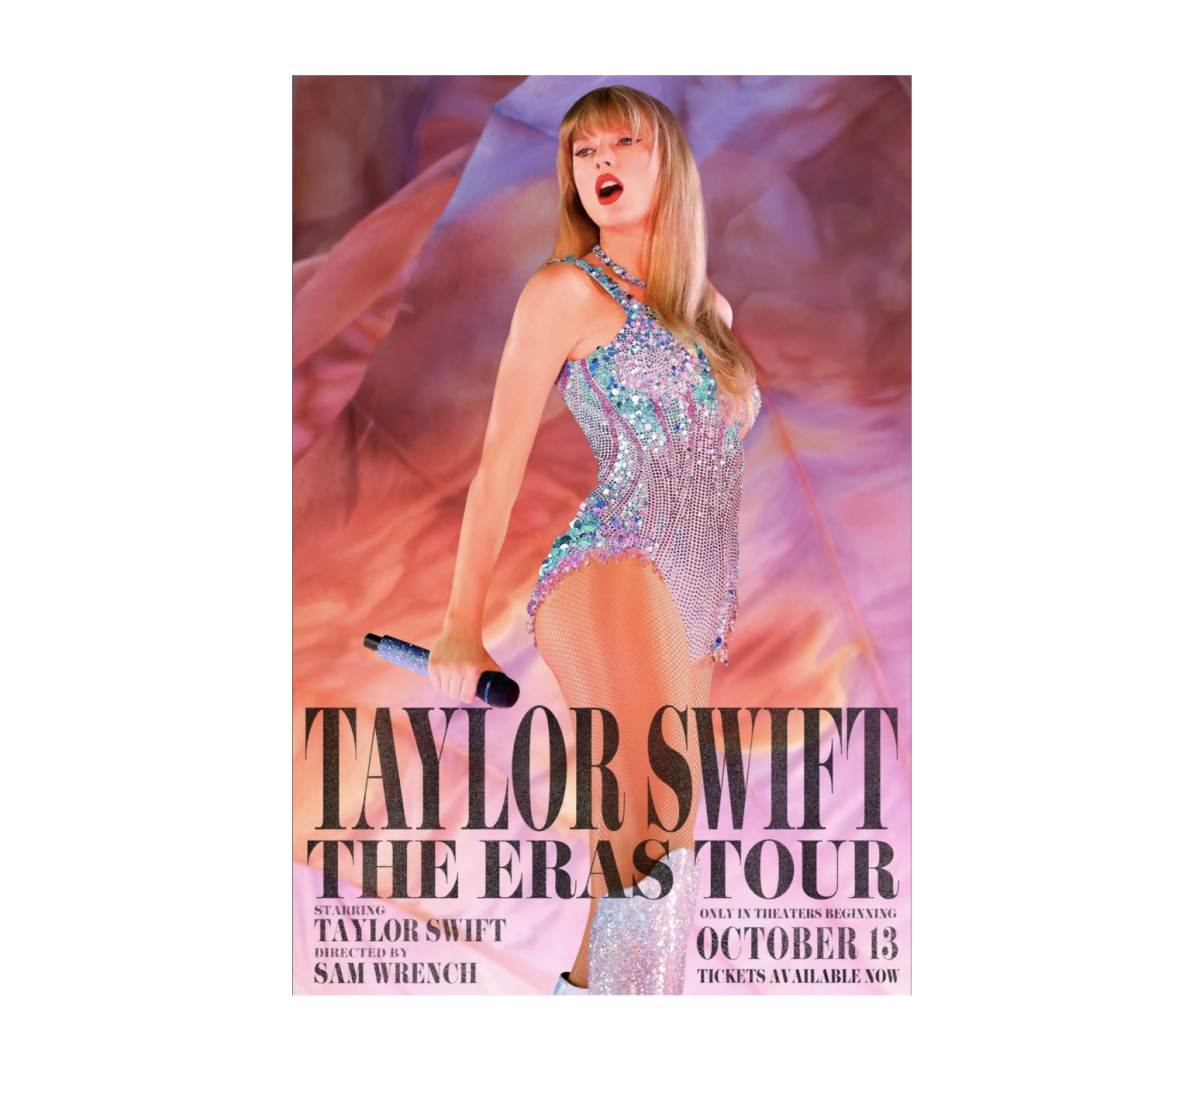 Theaters screened Taylor Swift’s The Eras Tour.